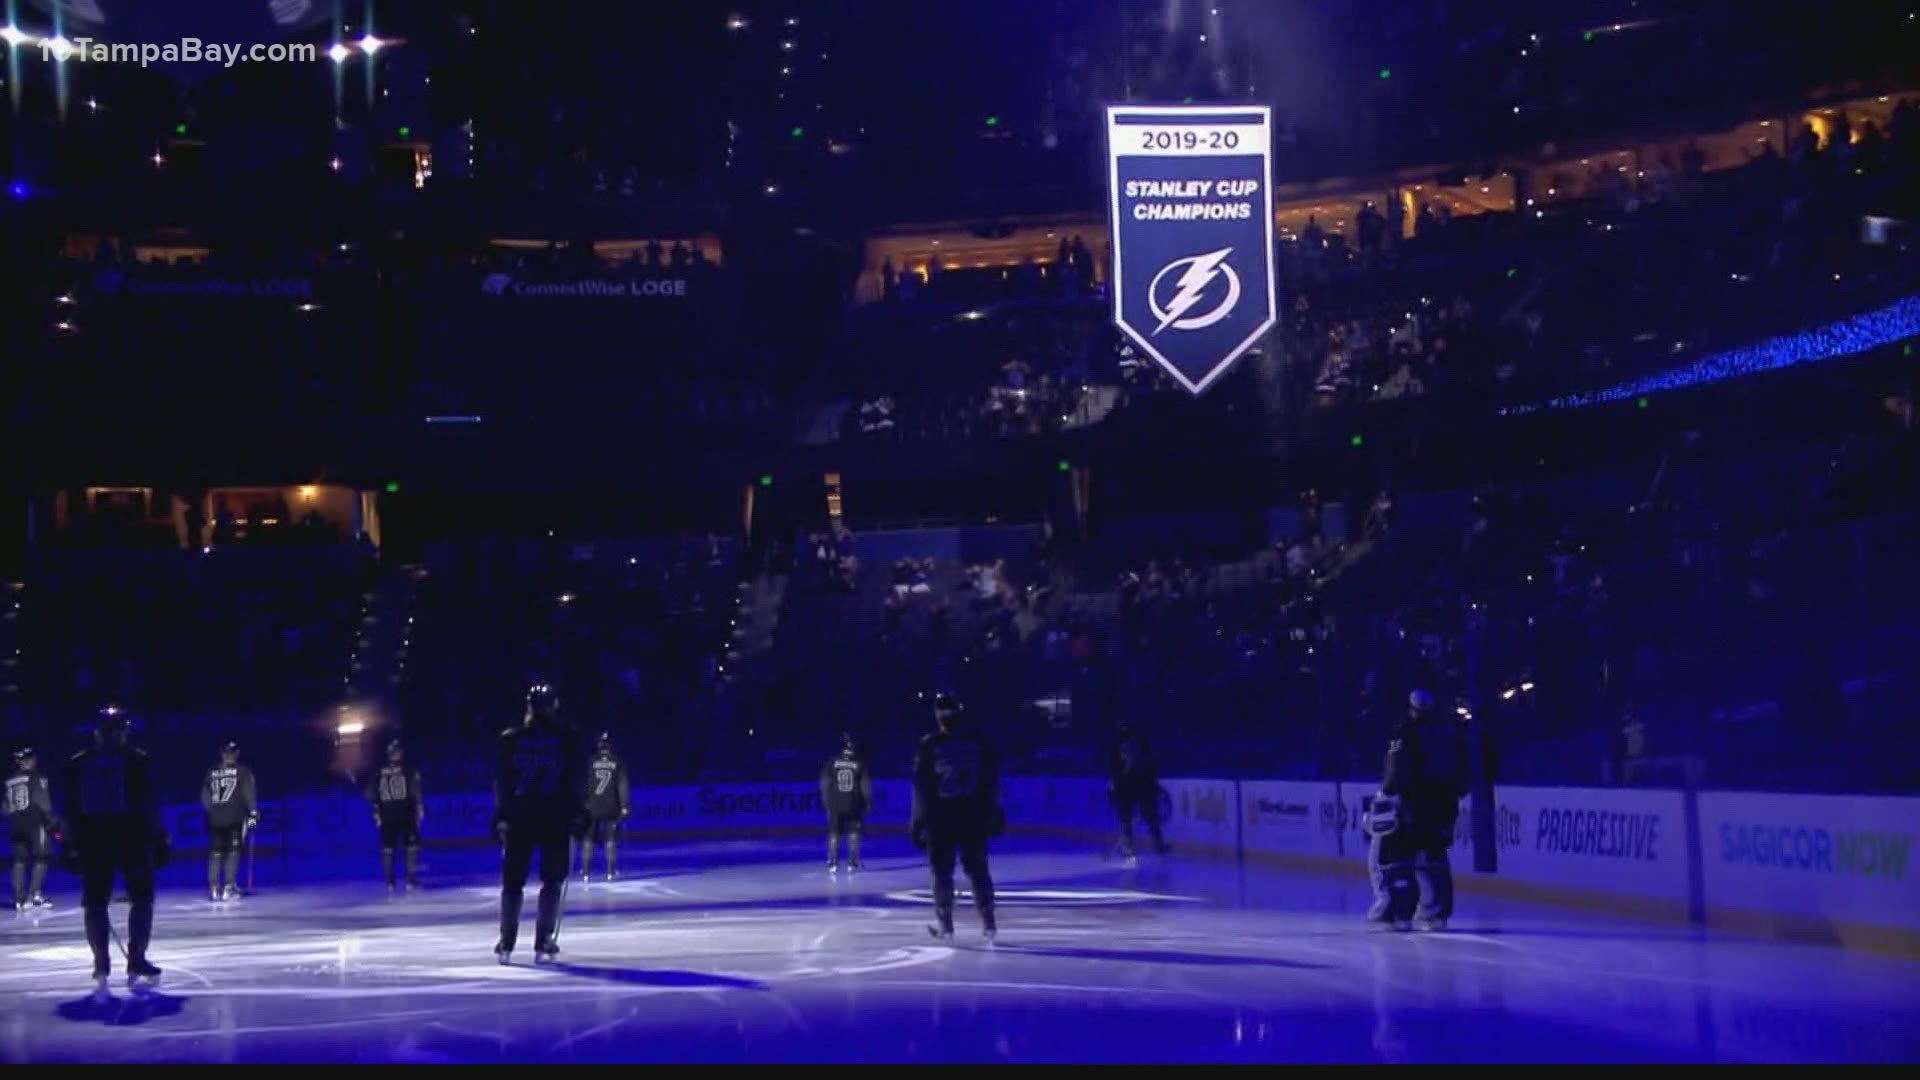 The reigning Stanley Cup Champs also held a moment of silence for fallen Tampa Master Police Officer Jesse Madsen before the game.